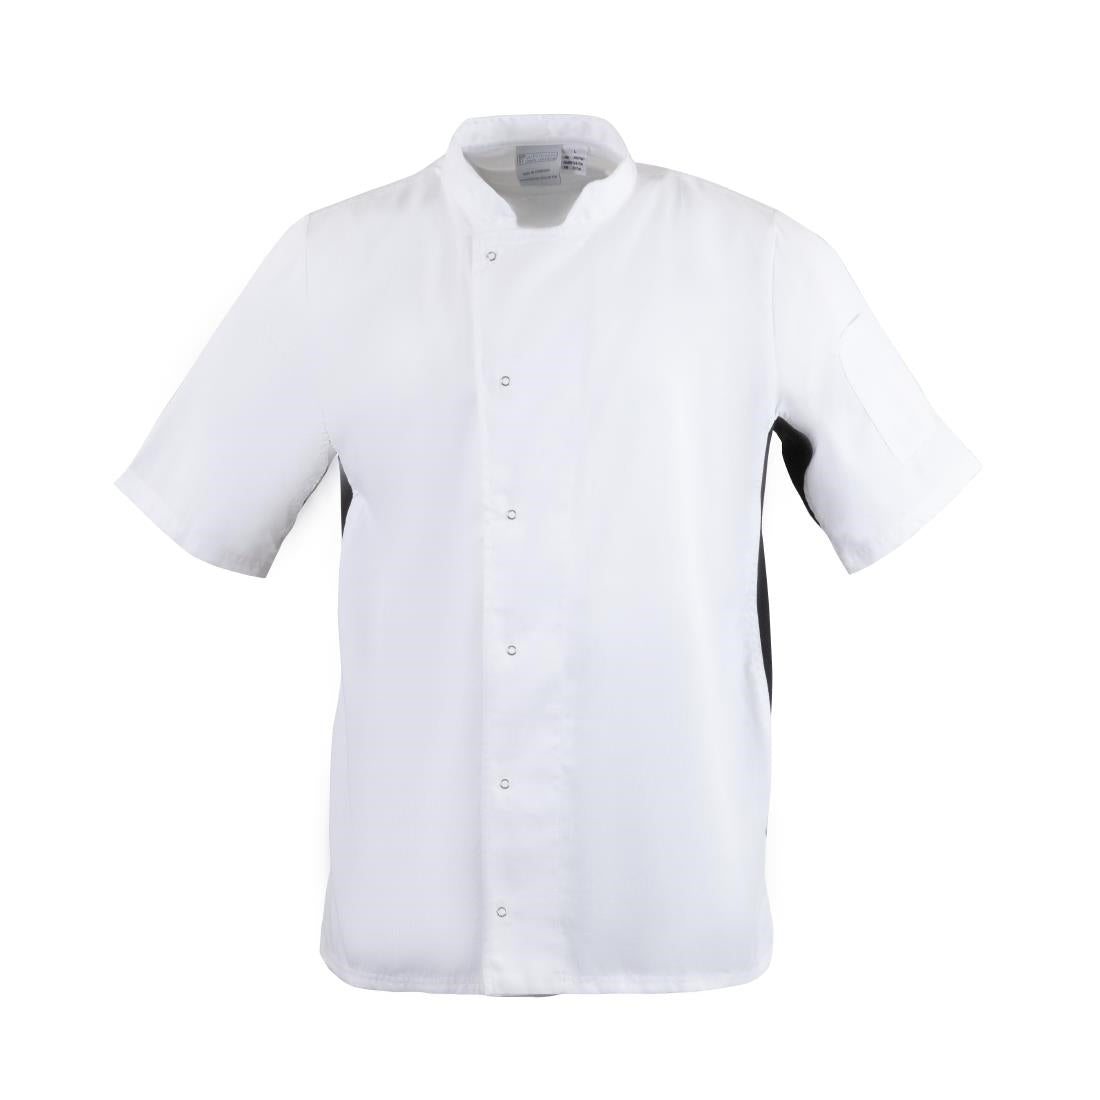 A928-XL Whites Nevada Unisex Chefs Jacket Short Sleeve Black and White XL JD Catering Equipment Solutions Ltd